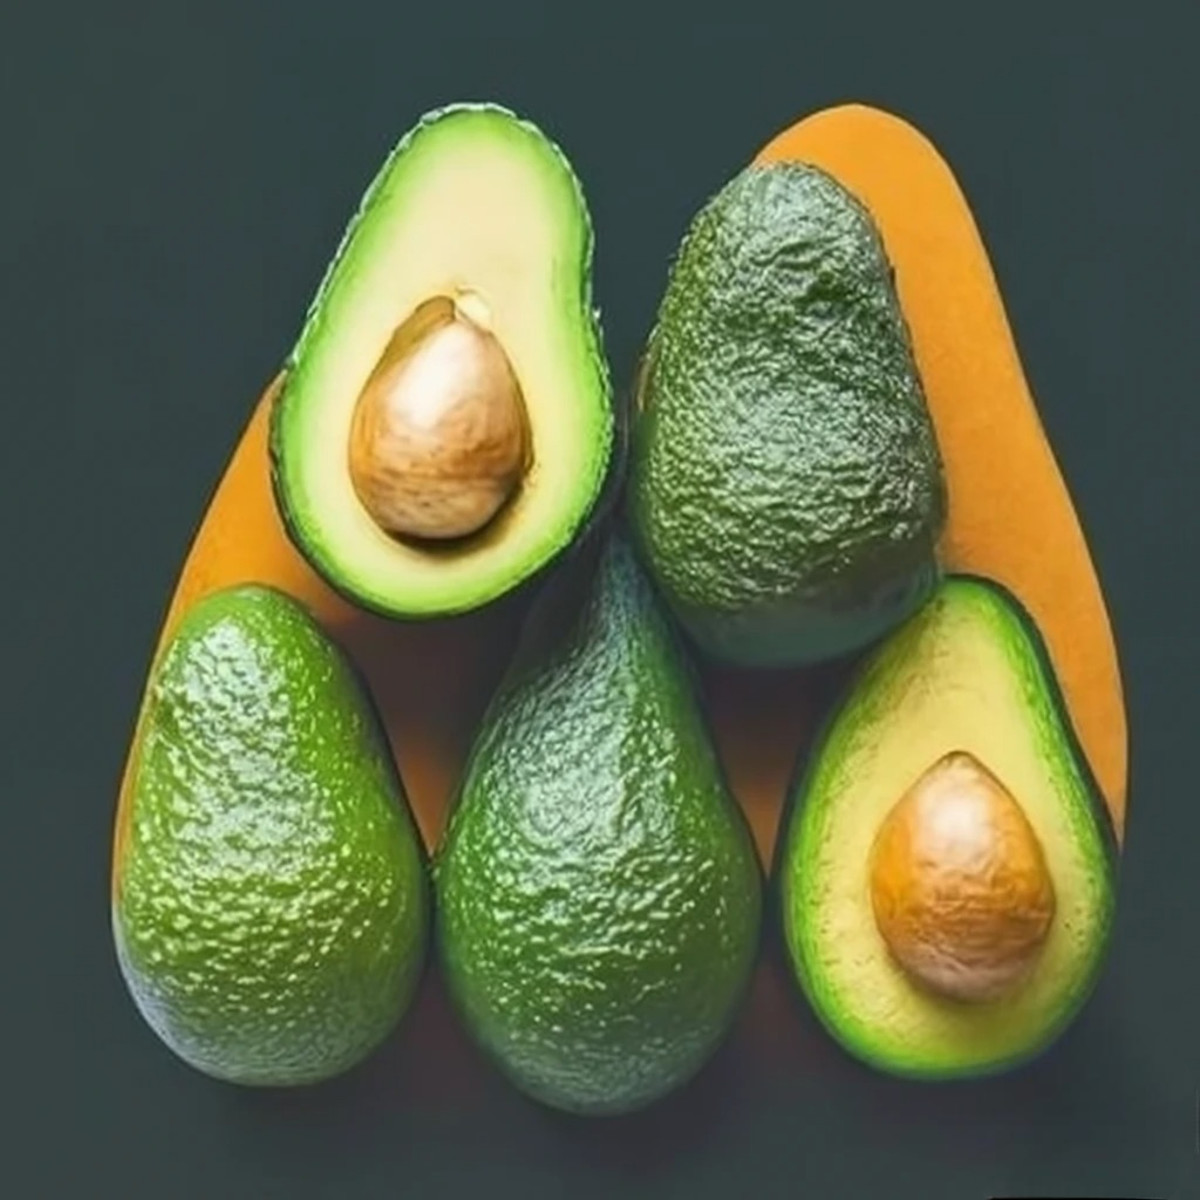 Are Avocado Seeds Edible? The Truths and Their Diverse Uses